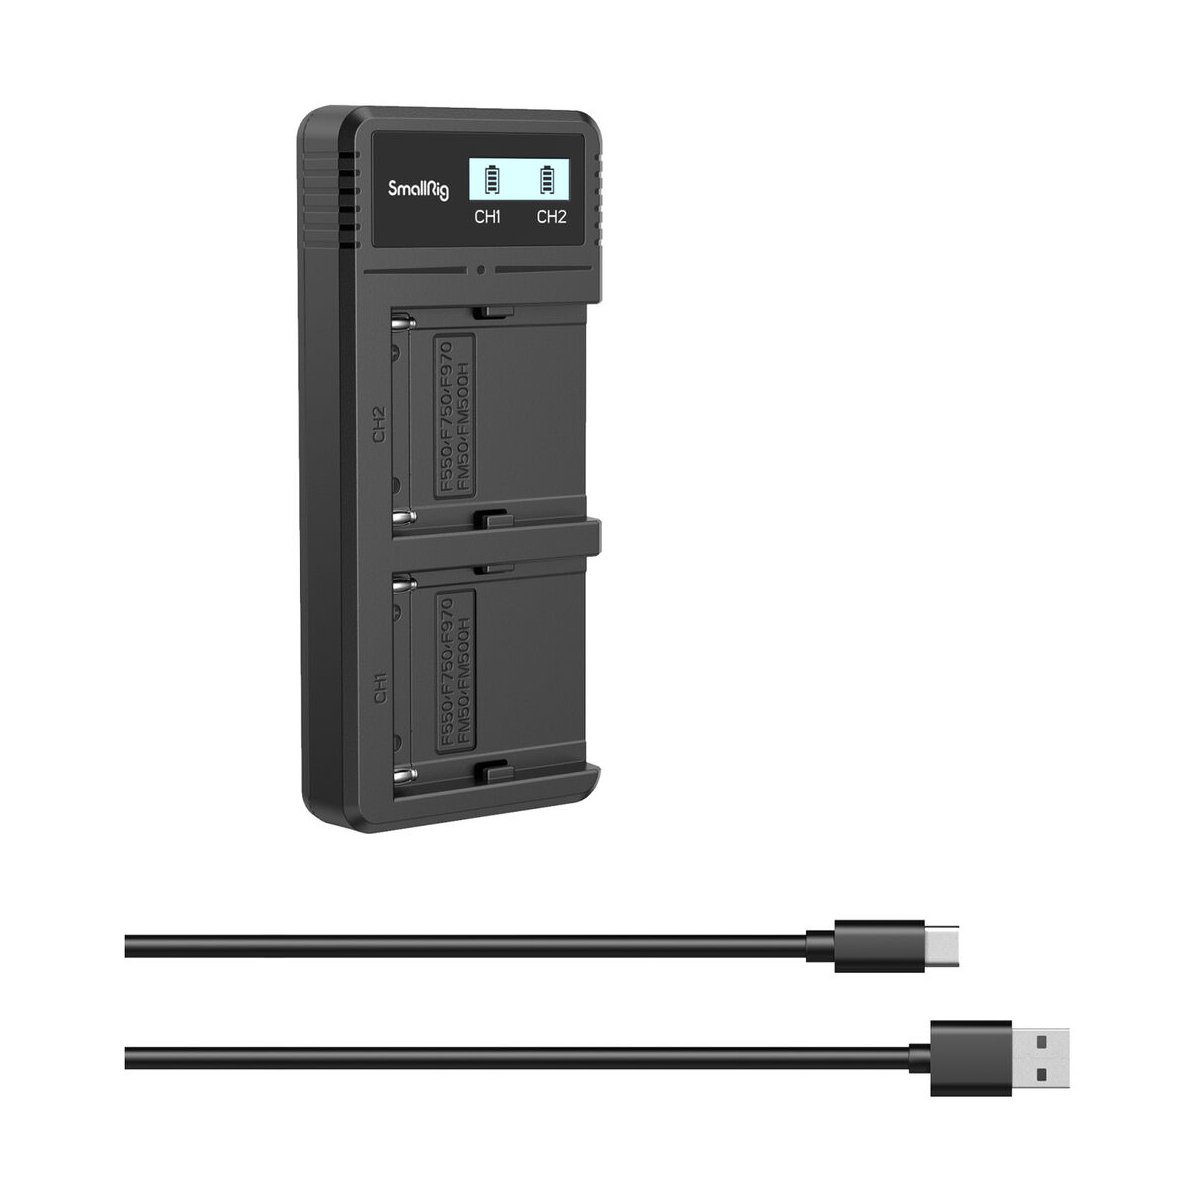 Sony NP-F970 Camera Battery Charger (SmallRig 4086)